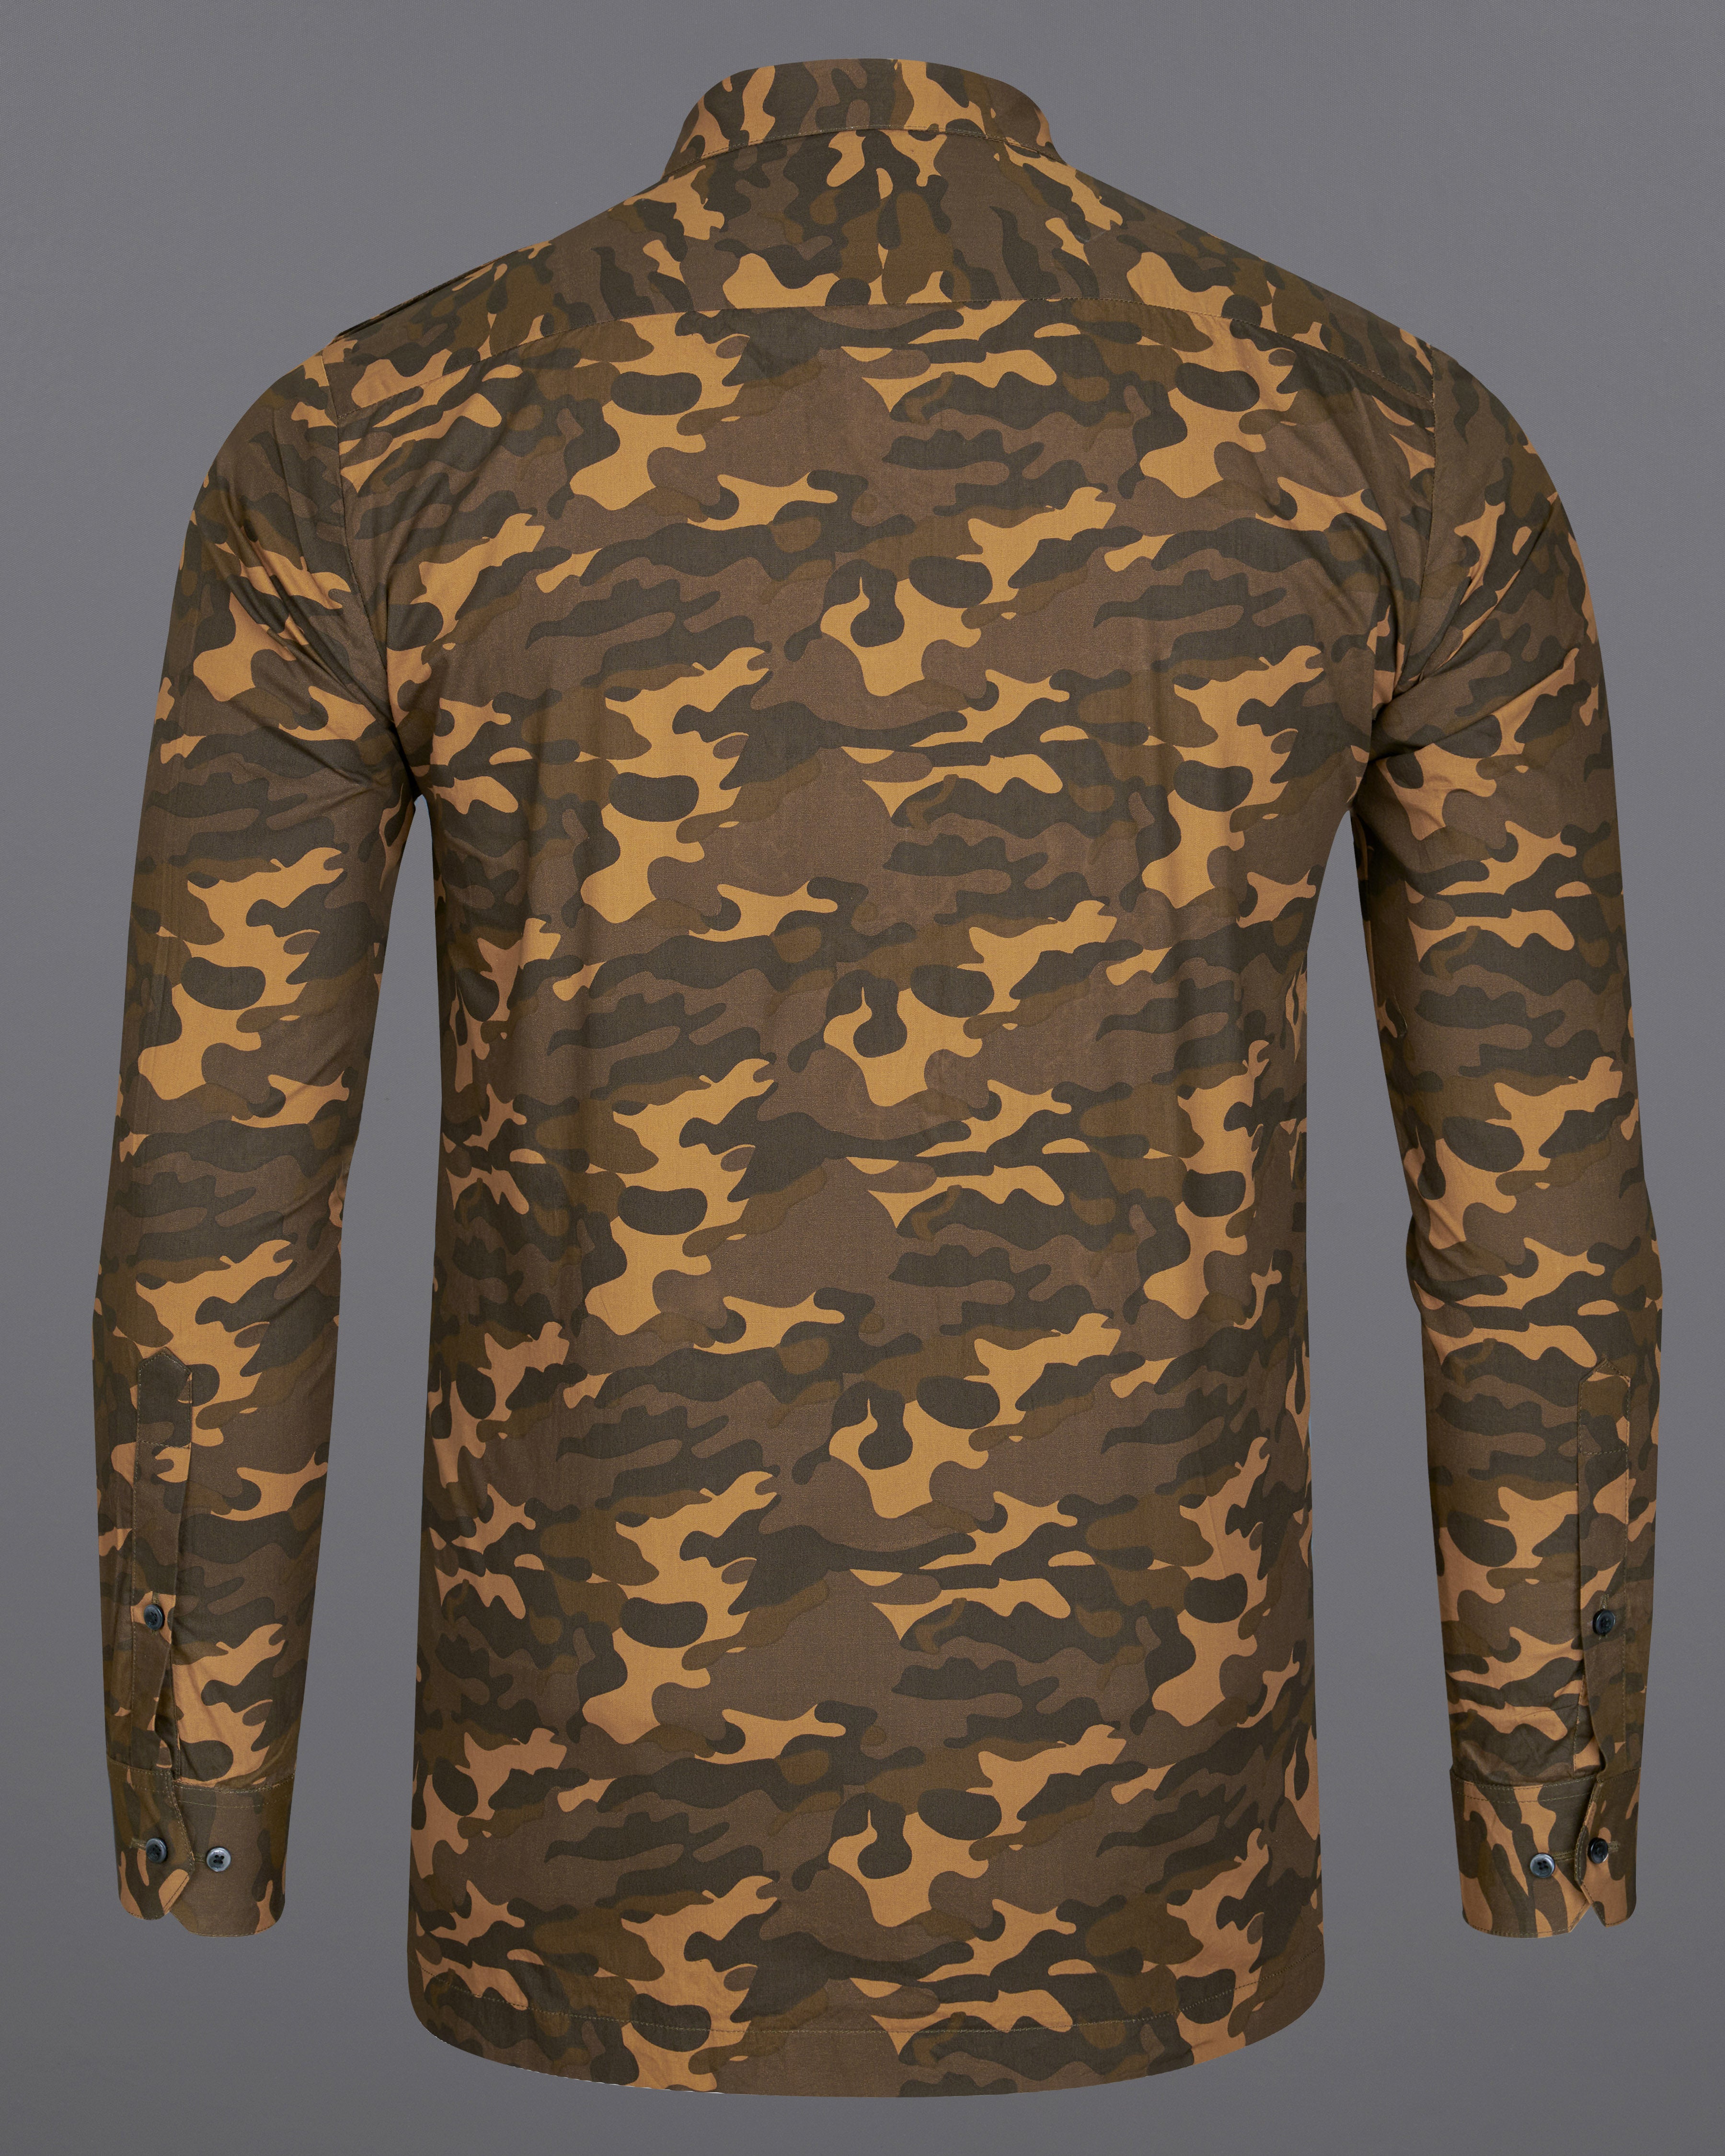 Taupe Brown with Birch Green Camouflage Royal Oxford Overshirt with Zipper Closure 9298-OS-ZP-P95-38,9298-OS-ZP-P95-H-38,9298-OS-ZP-P95-39,9298-OS-ZP-P95-H-39,9298-OS-ZP-P95-40,9298-OS-ZP-P95-H-40,9298-OS-ZP-P95-42,9298-OS-ZP-P95-H-42,9298-OS-ZP-P95-44,9298-OS-ZP-P95-H-44,9298-OS-ZP-P95-46,9298-OS-ZP-P95-H-46,9298-OS-ZP-P95-48,9298-OS-ZP-P95-H-48,9298-OS-ZP-P95-50,9298-OS-ZP-P95-H-50,9298-OS-ZP-P95-52,9298-OS-ZP-P95-H-52